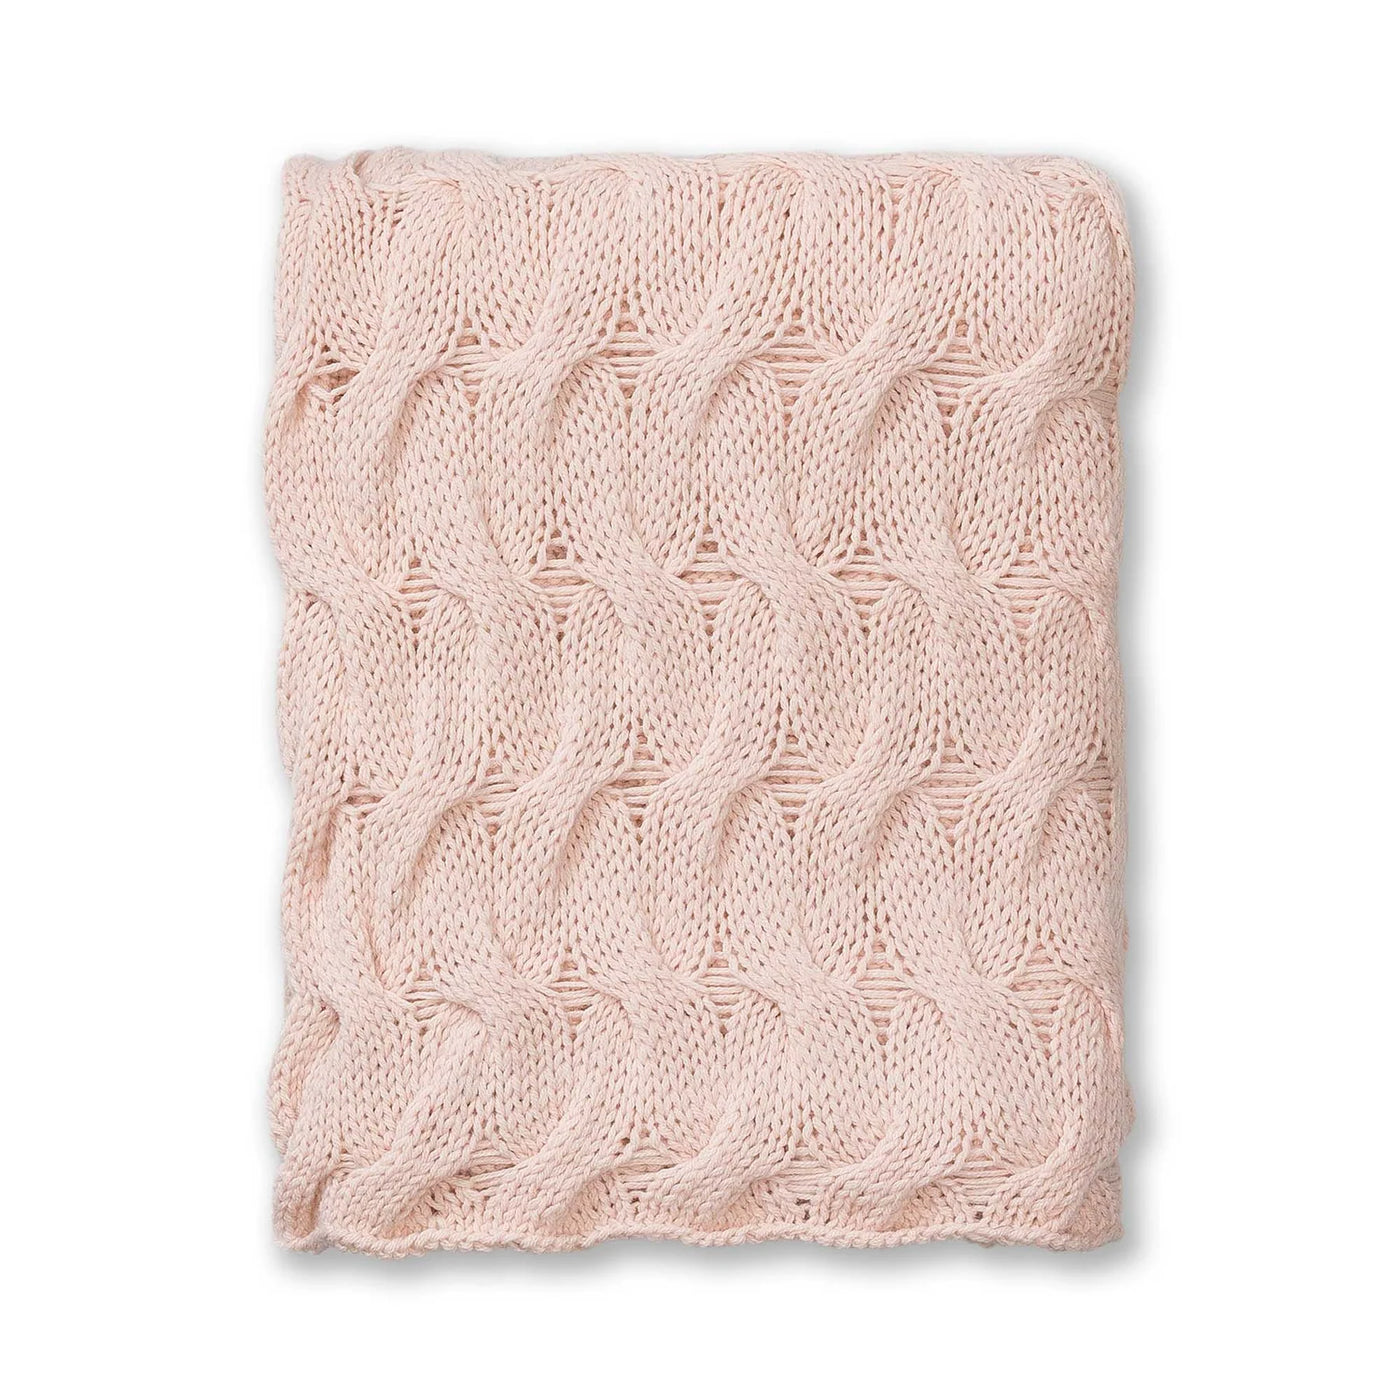 ALICIA ADAMS THROW EVERGLADES (Available in Colors)